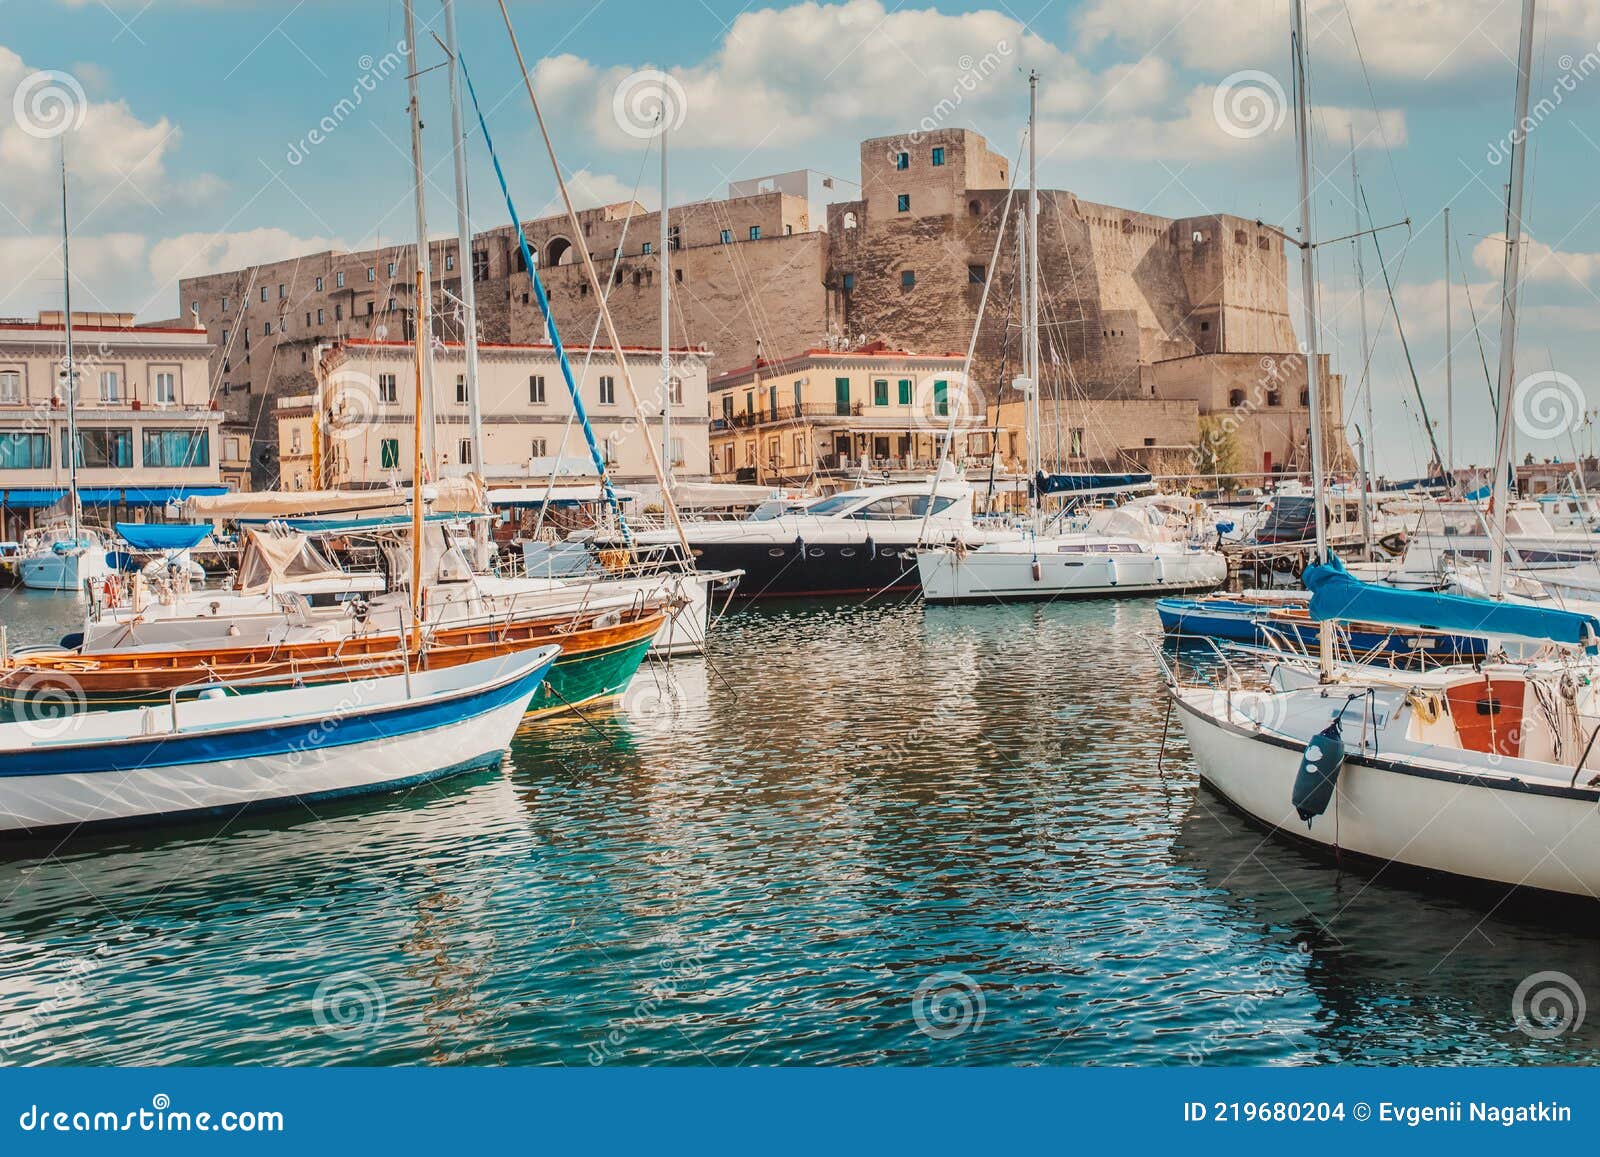 castel dell`ovo or egg castle a medieval fortress located in the gulf of naples.